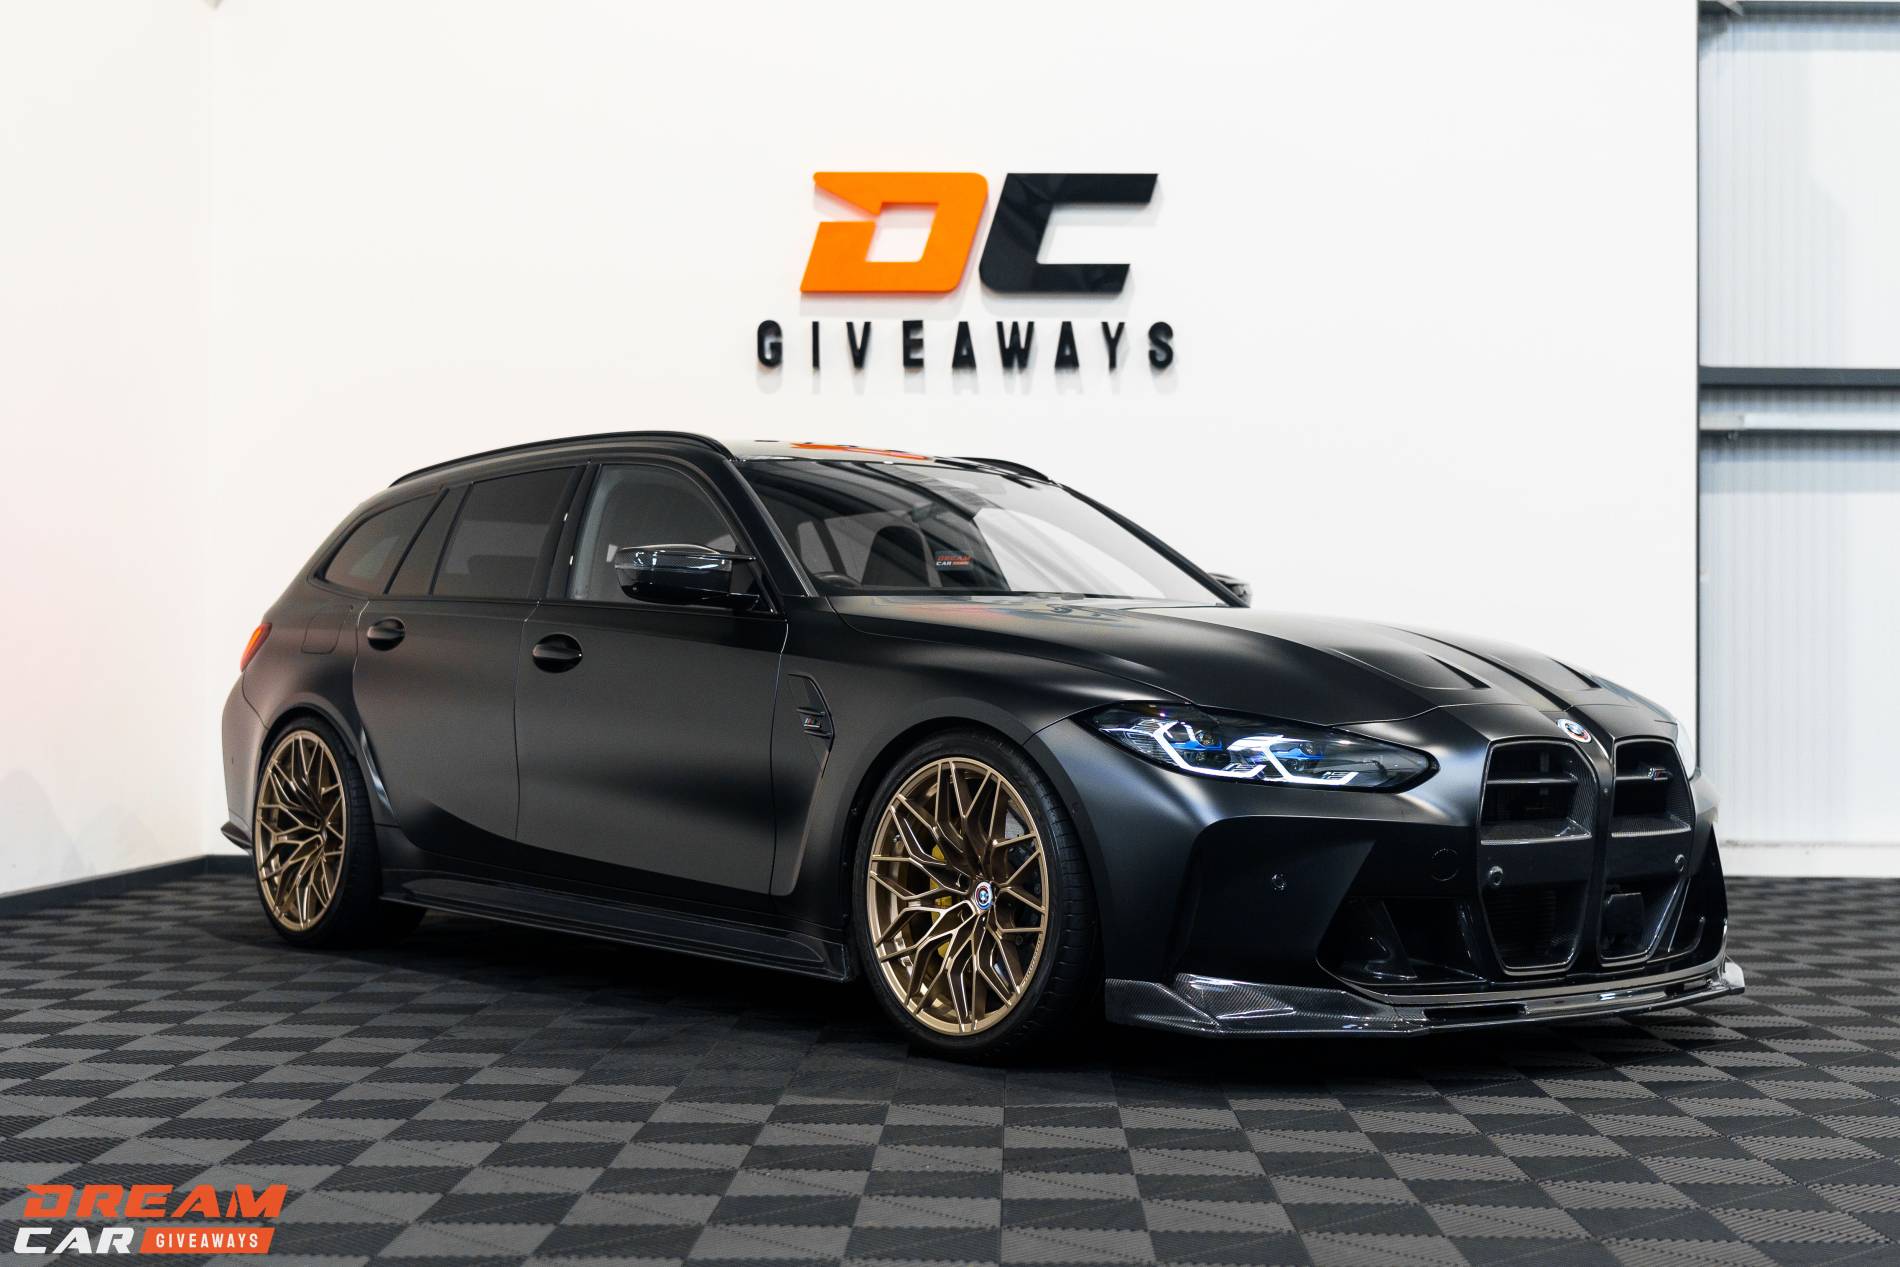 Win this BMW M3 Touring & £3,000 or £62,000 Tax Free